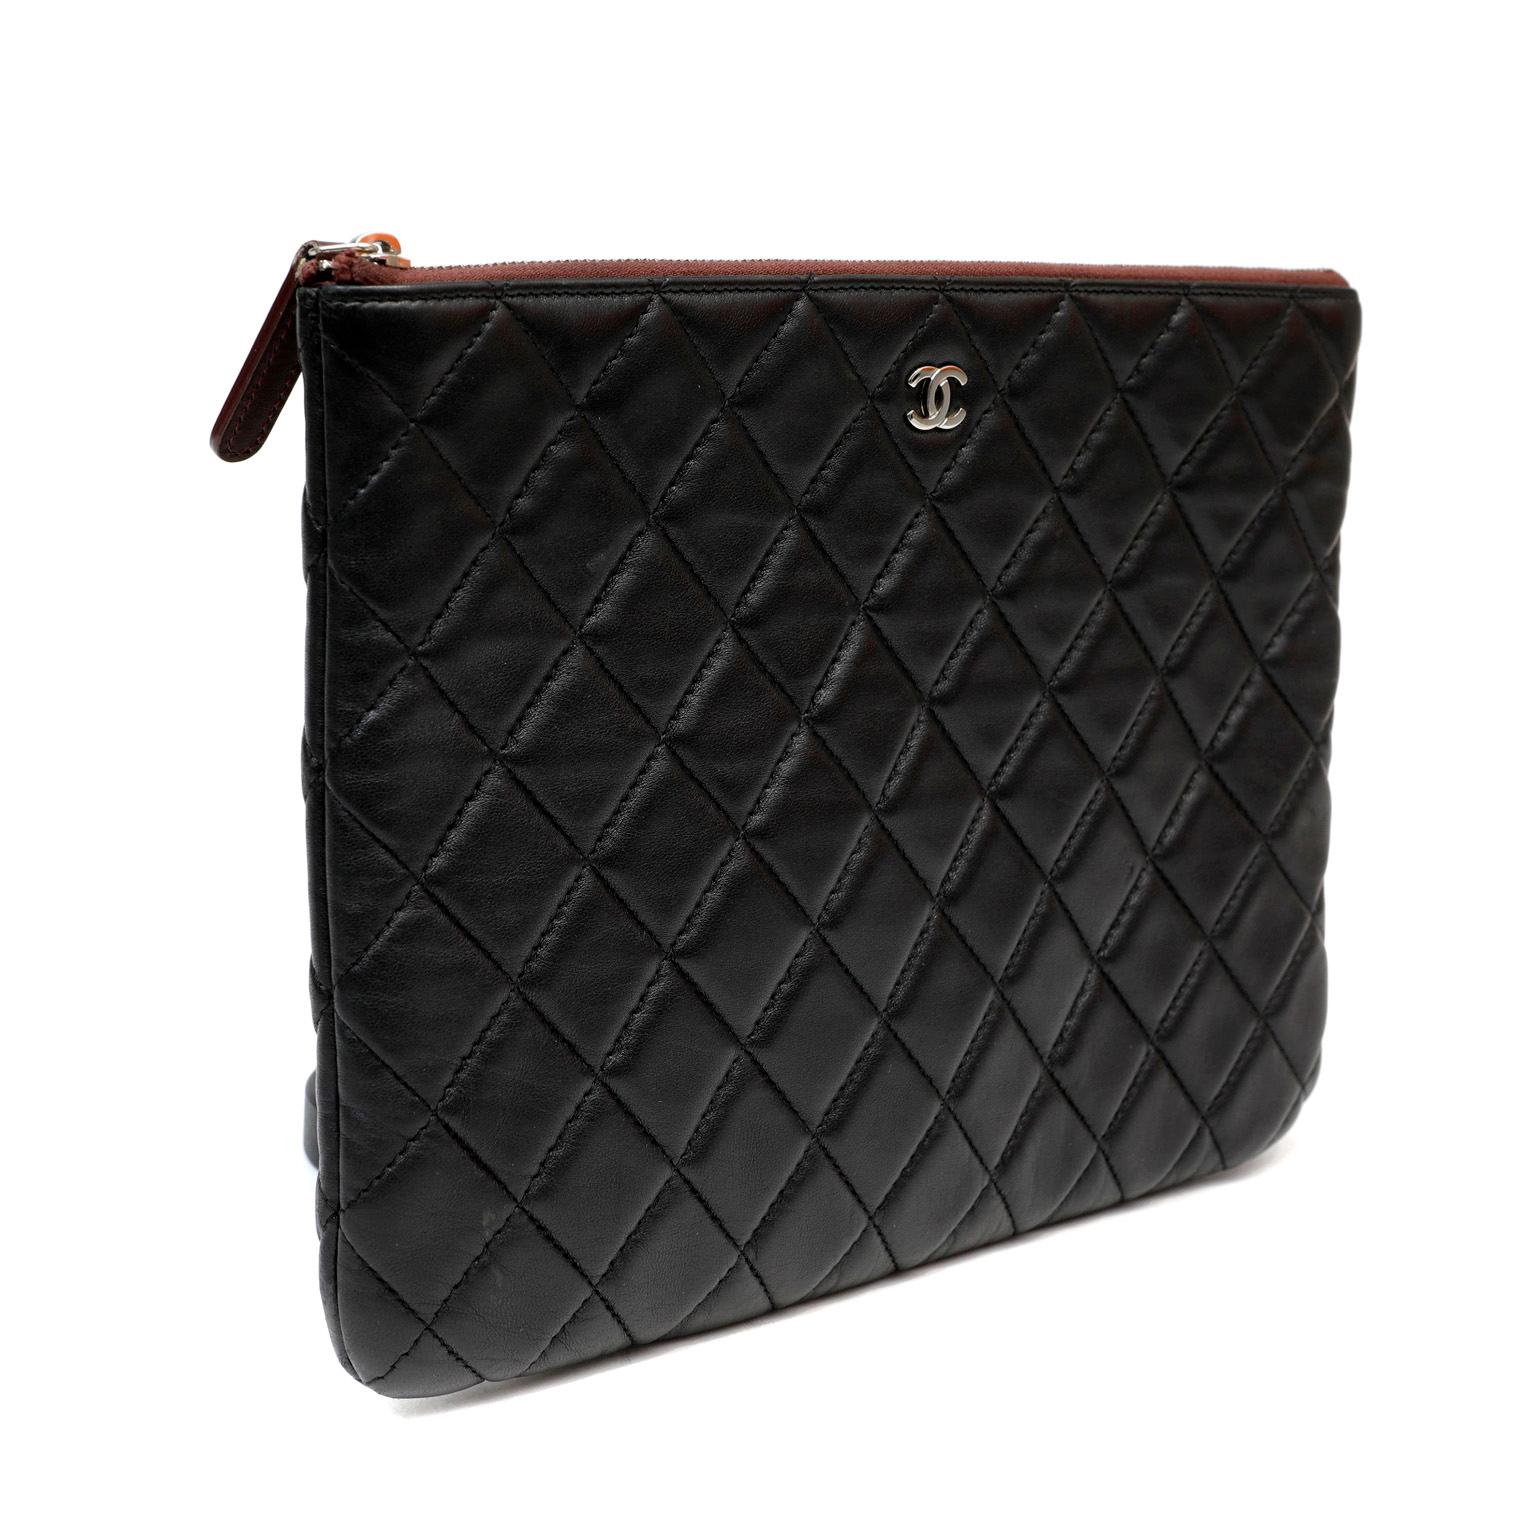 This authentic Chanel Black Lambskin Classic Case is in pristine condition.  Spacious slim zip top case is quilted in signature Chanel diamond pattern. Perfect for evening clutch carry or tossing inside a larger bag.  Dust bag